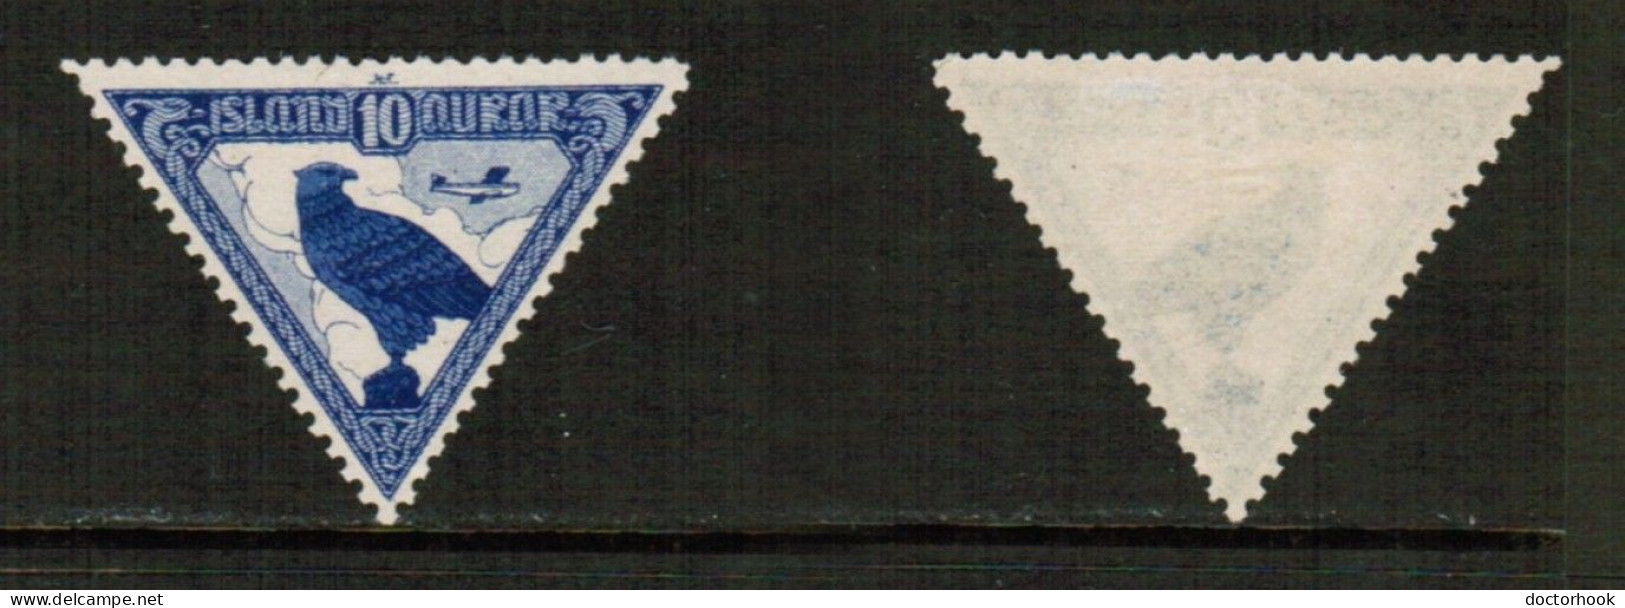 ICELAND   Scott # C 3* MINT HINGED (CONDITION AS PER SCAN) (Stamp Scan # 915-5) - Luftpost